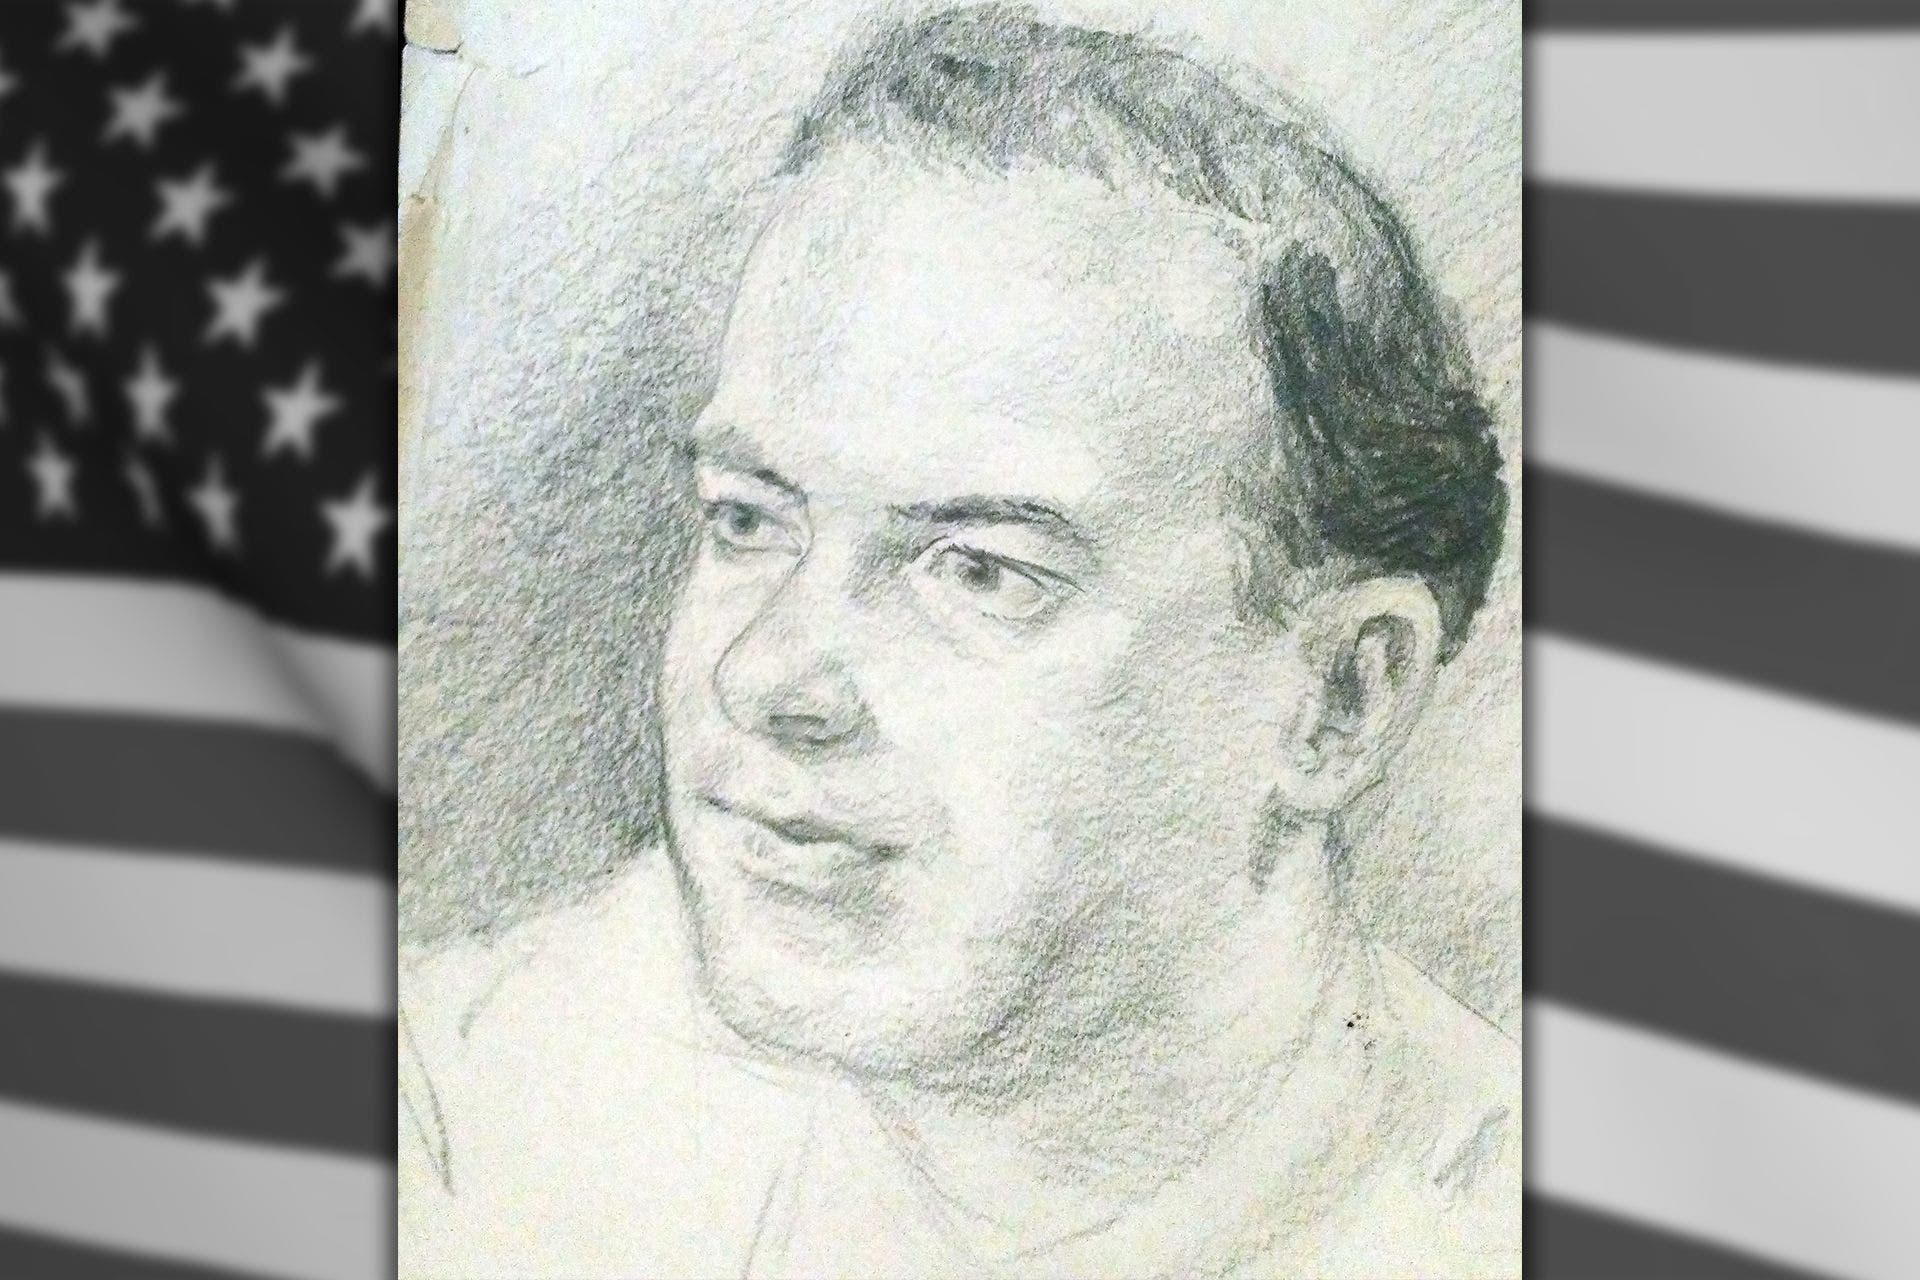 WWII veteran’s son seeks to return portraits of soldiers his father drew